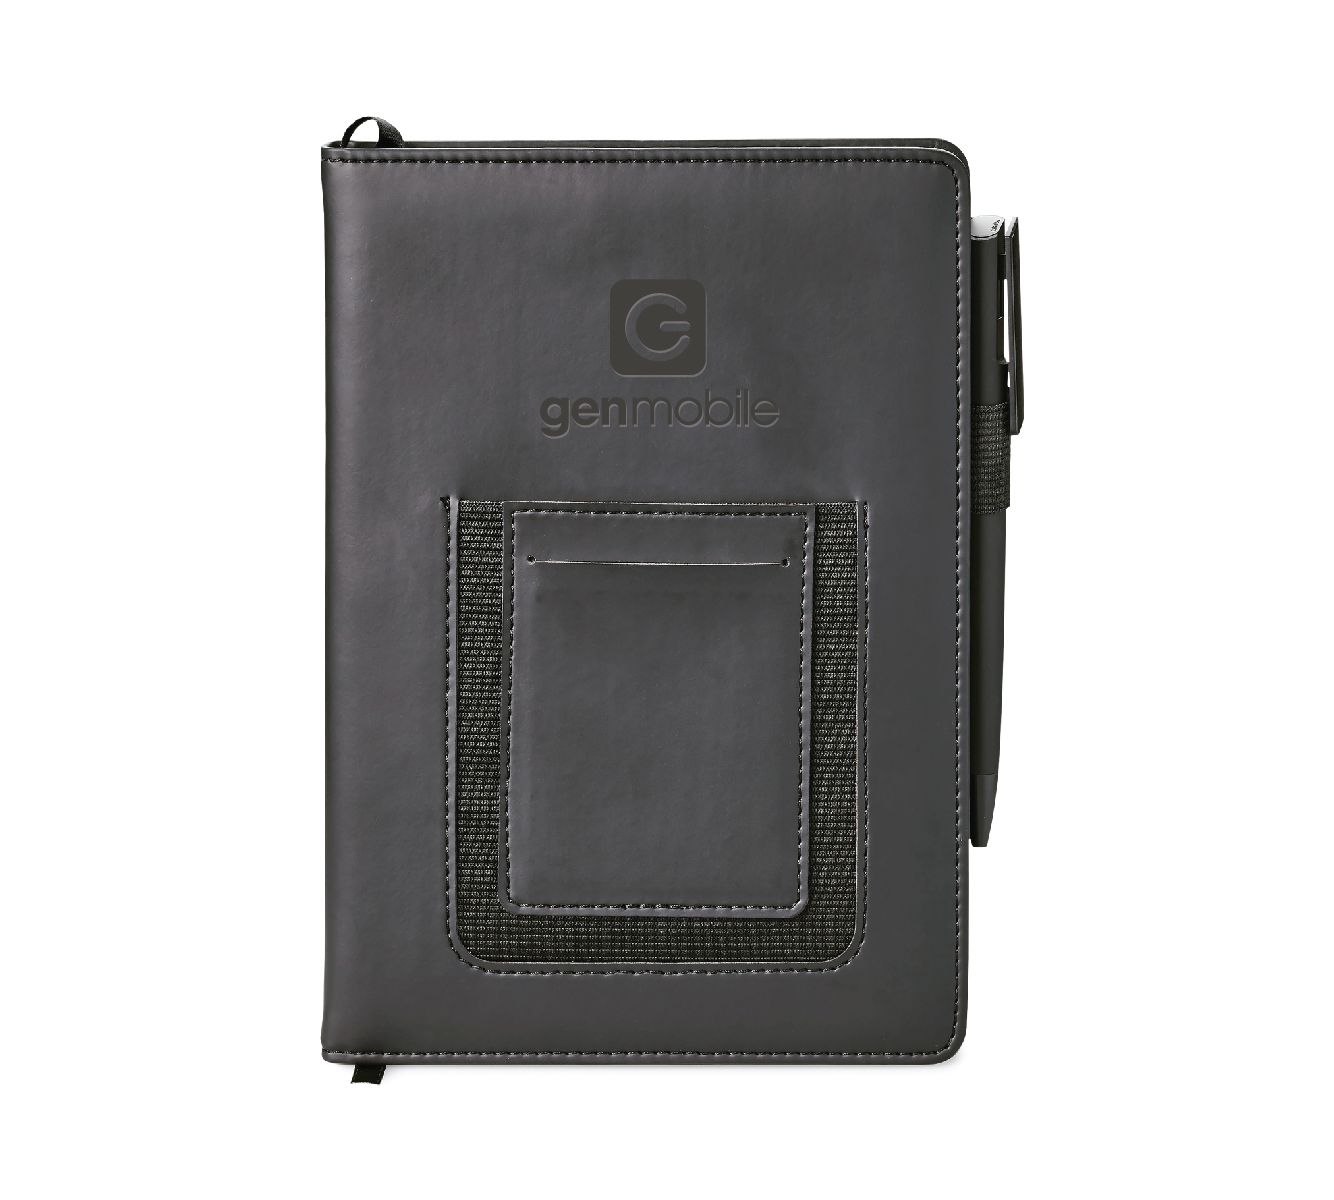 Hard Cover Journal Combo with Gen Mobile Logo